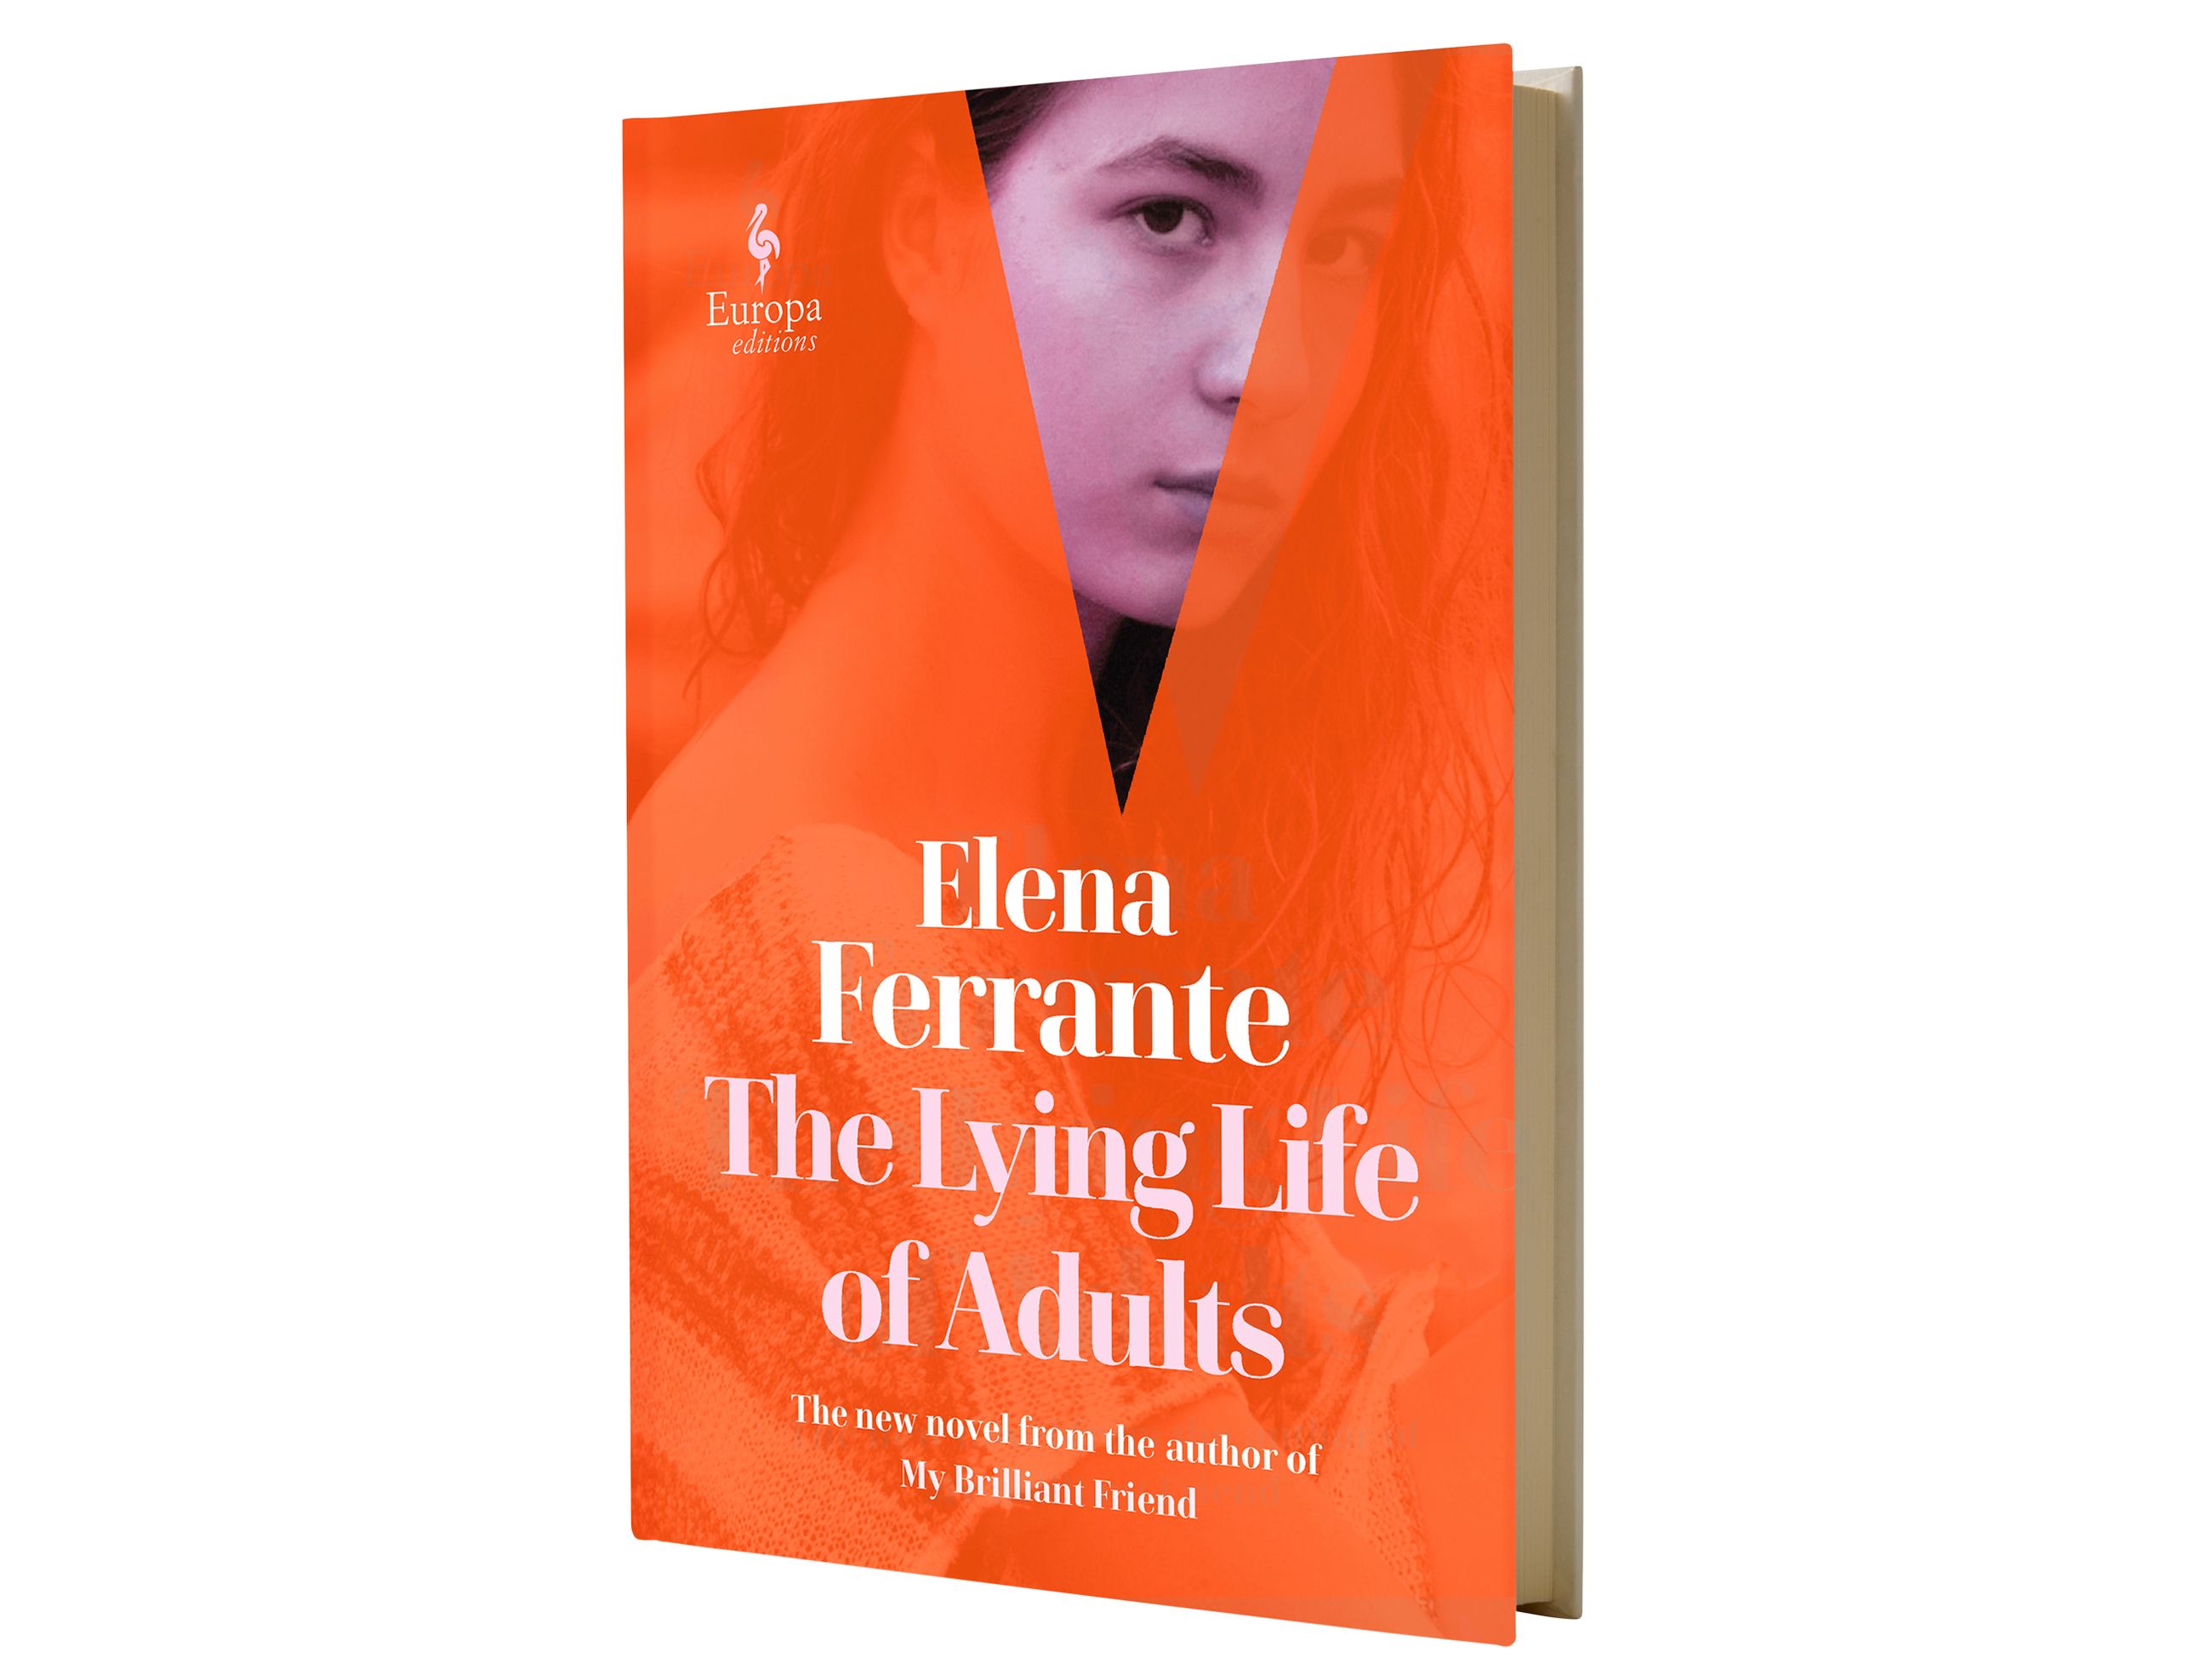 the lying life of adults by elena ferrante